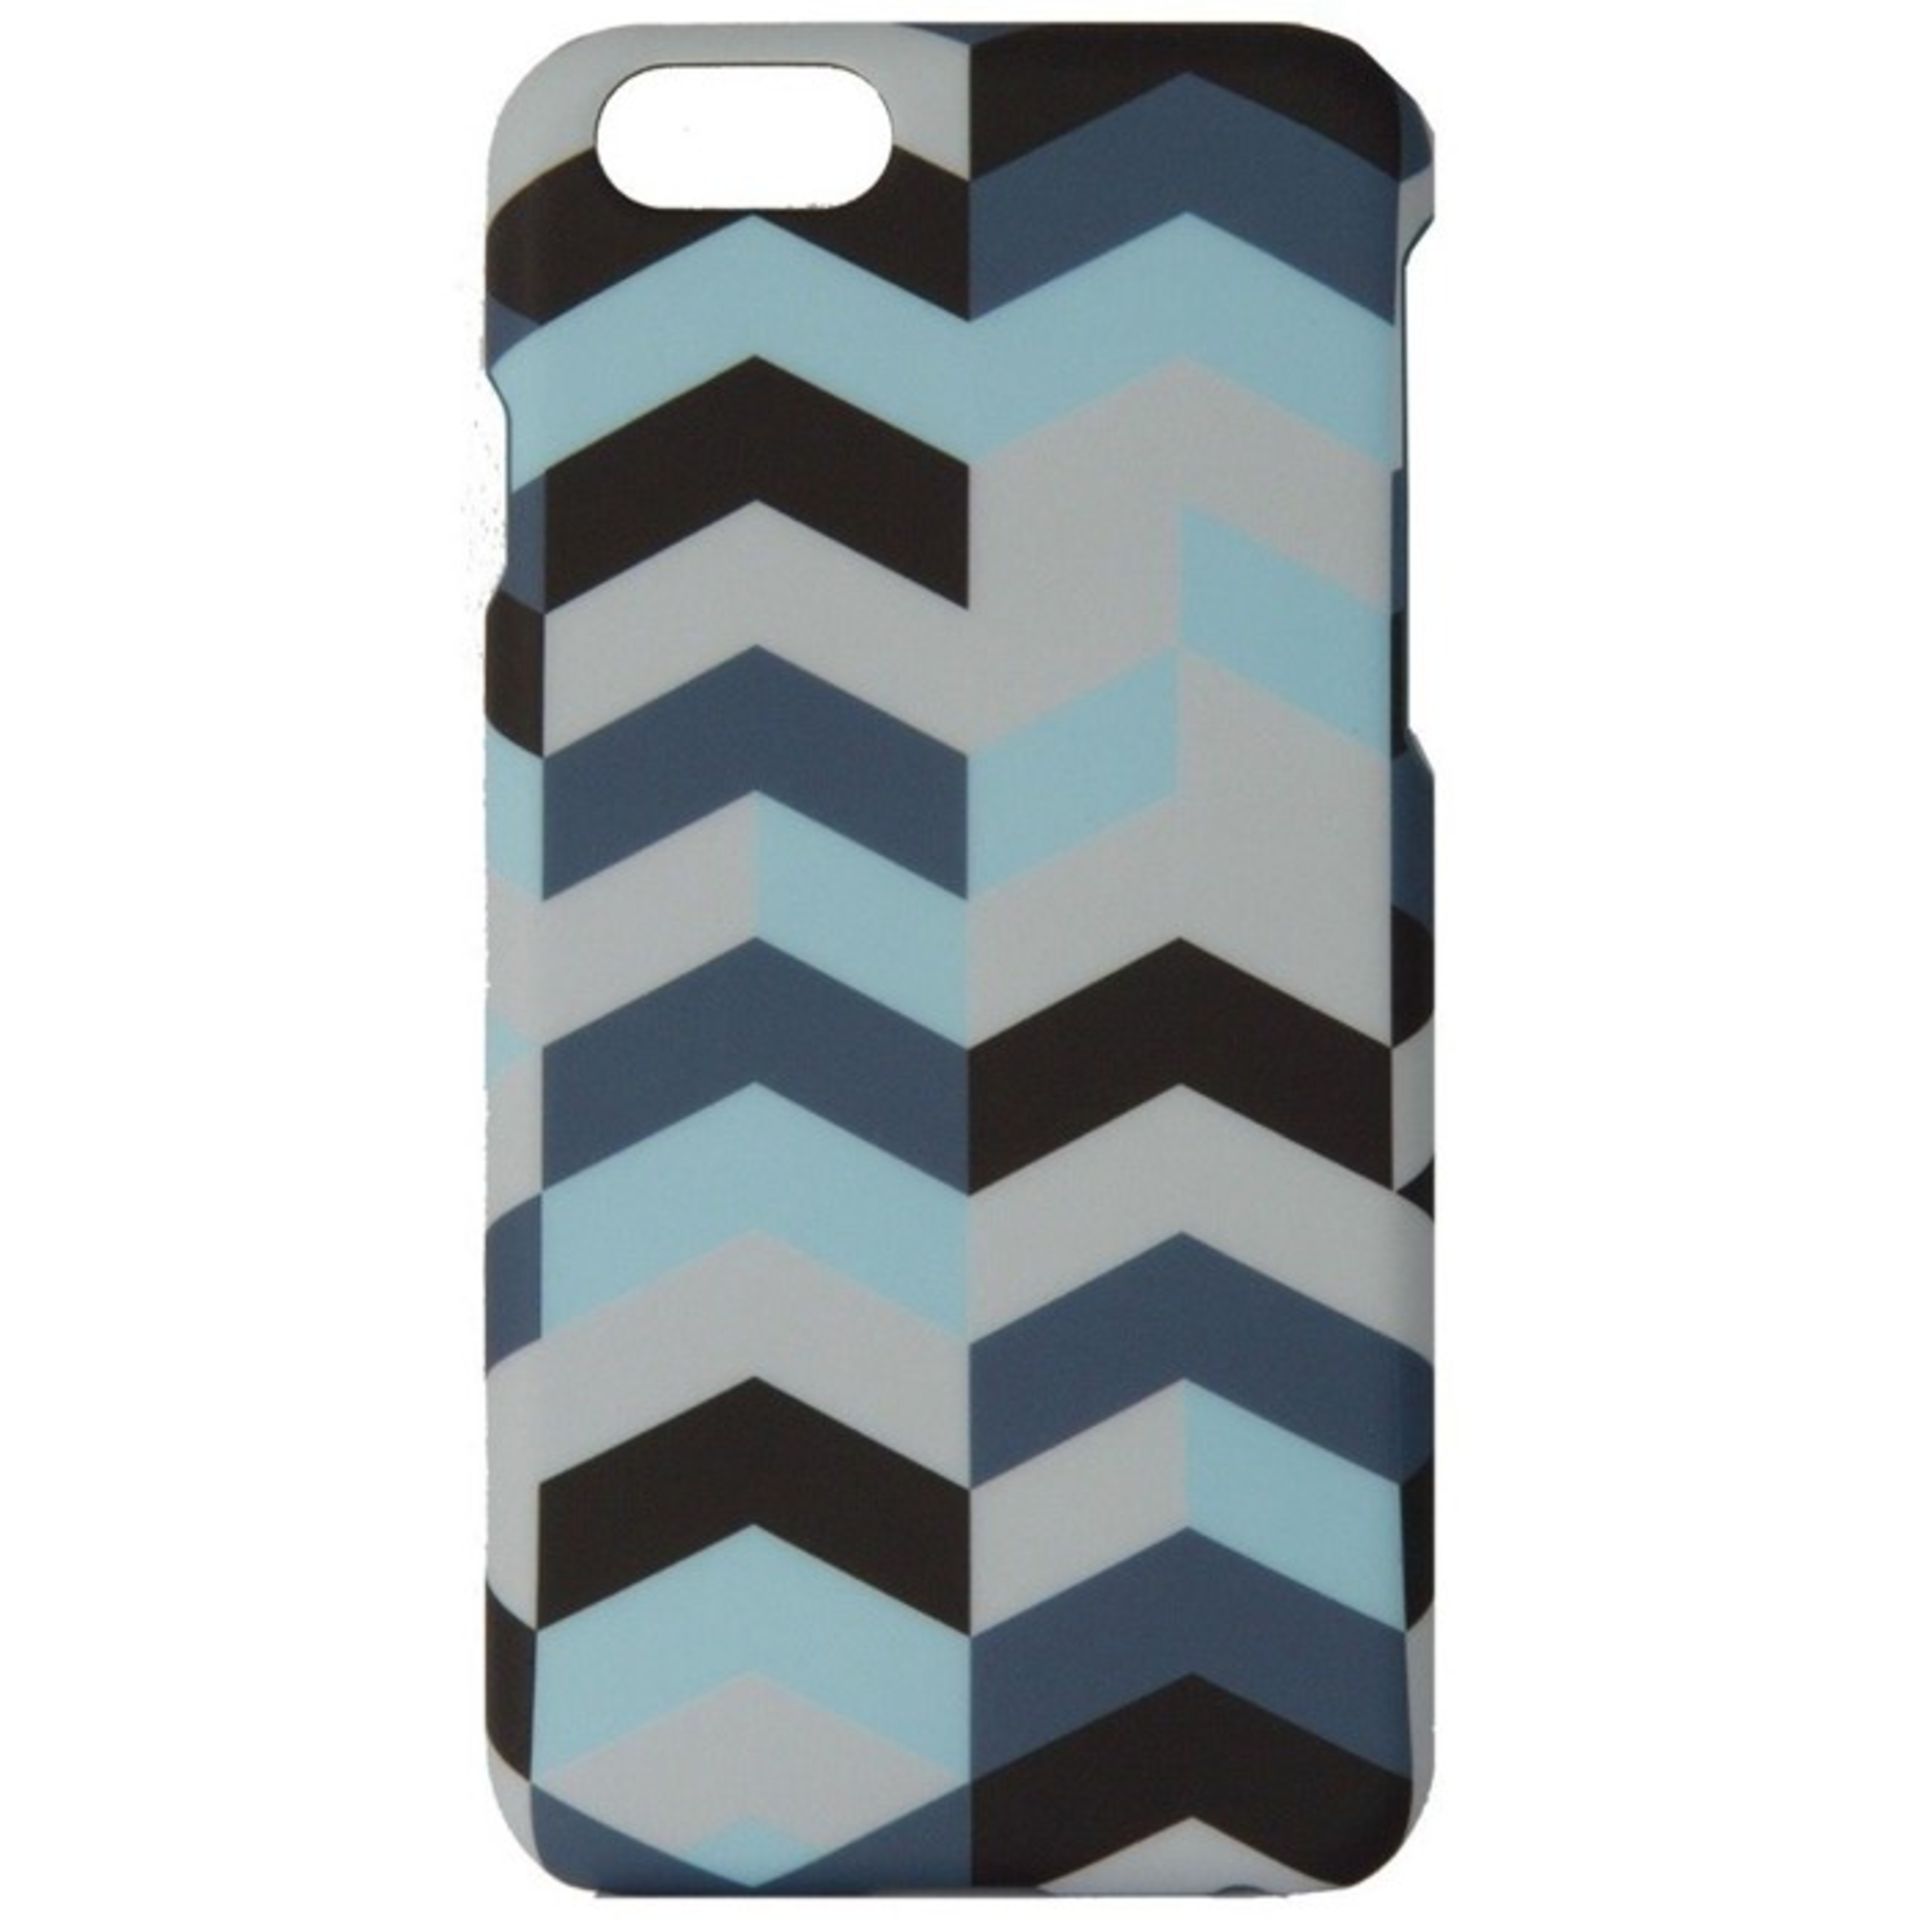 13 AS NEW CHEVRON BLUE IPHONE 6 CASES / RRP £129.8